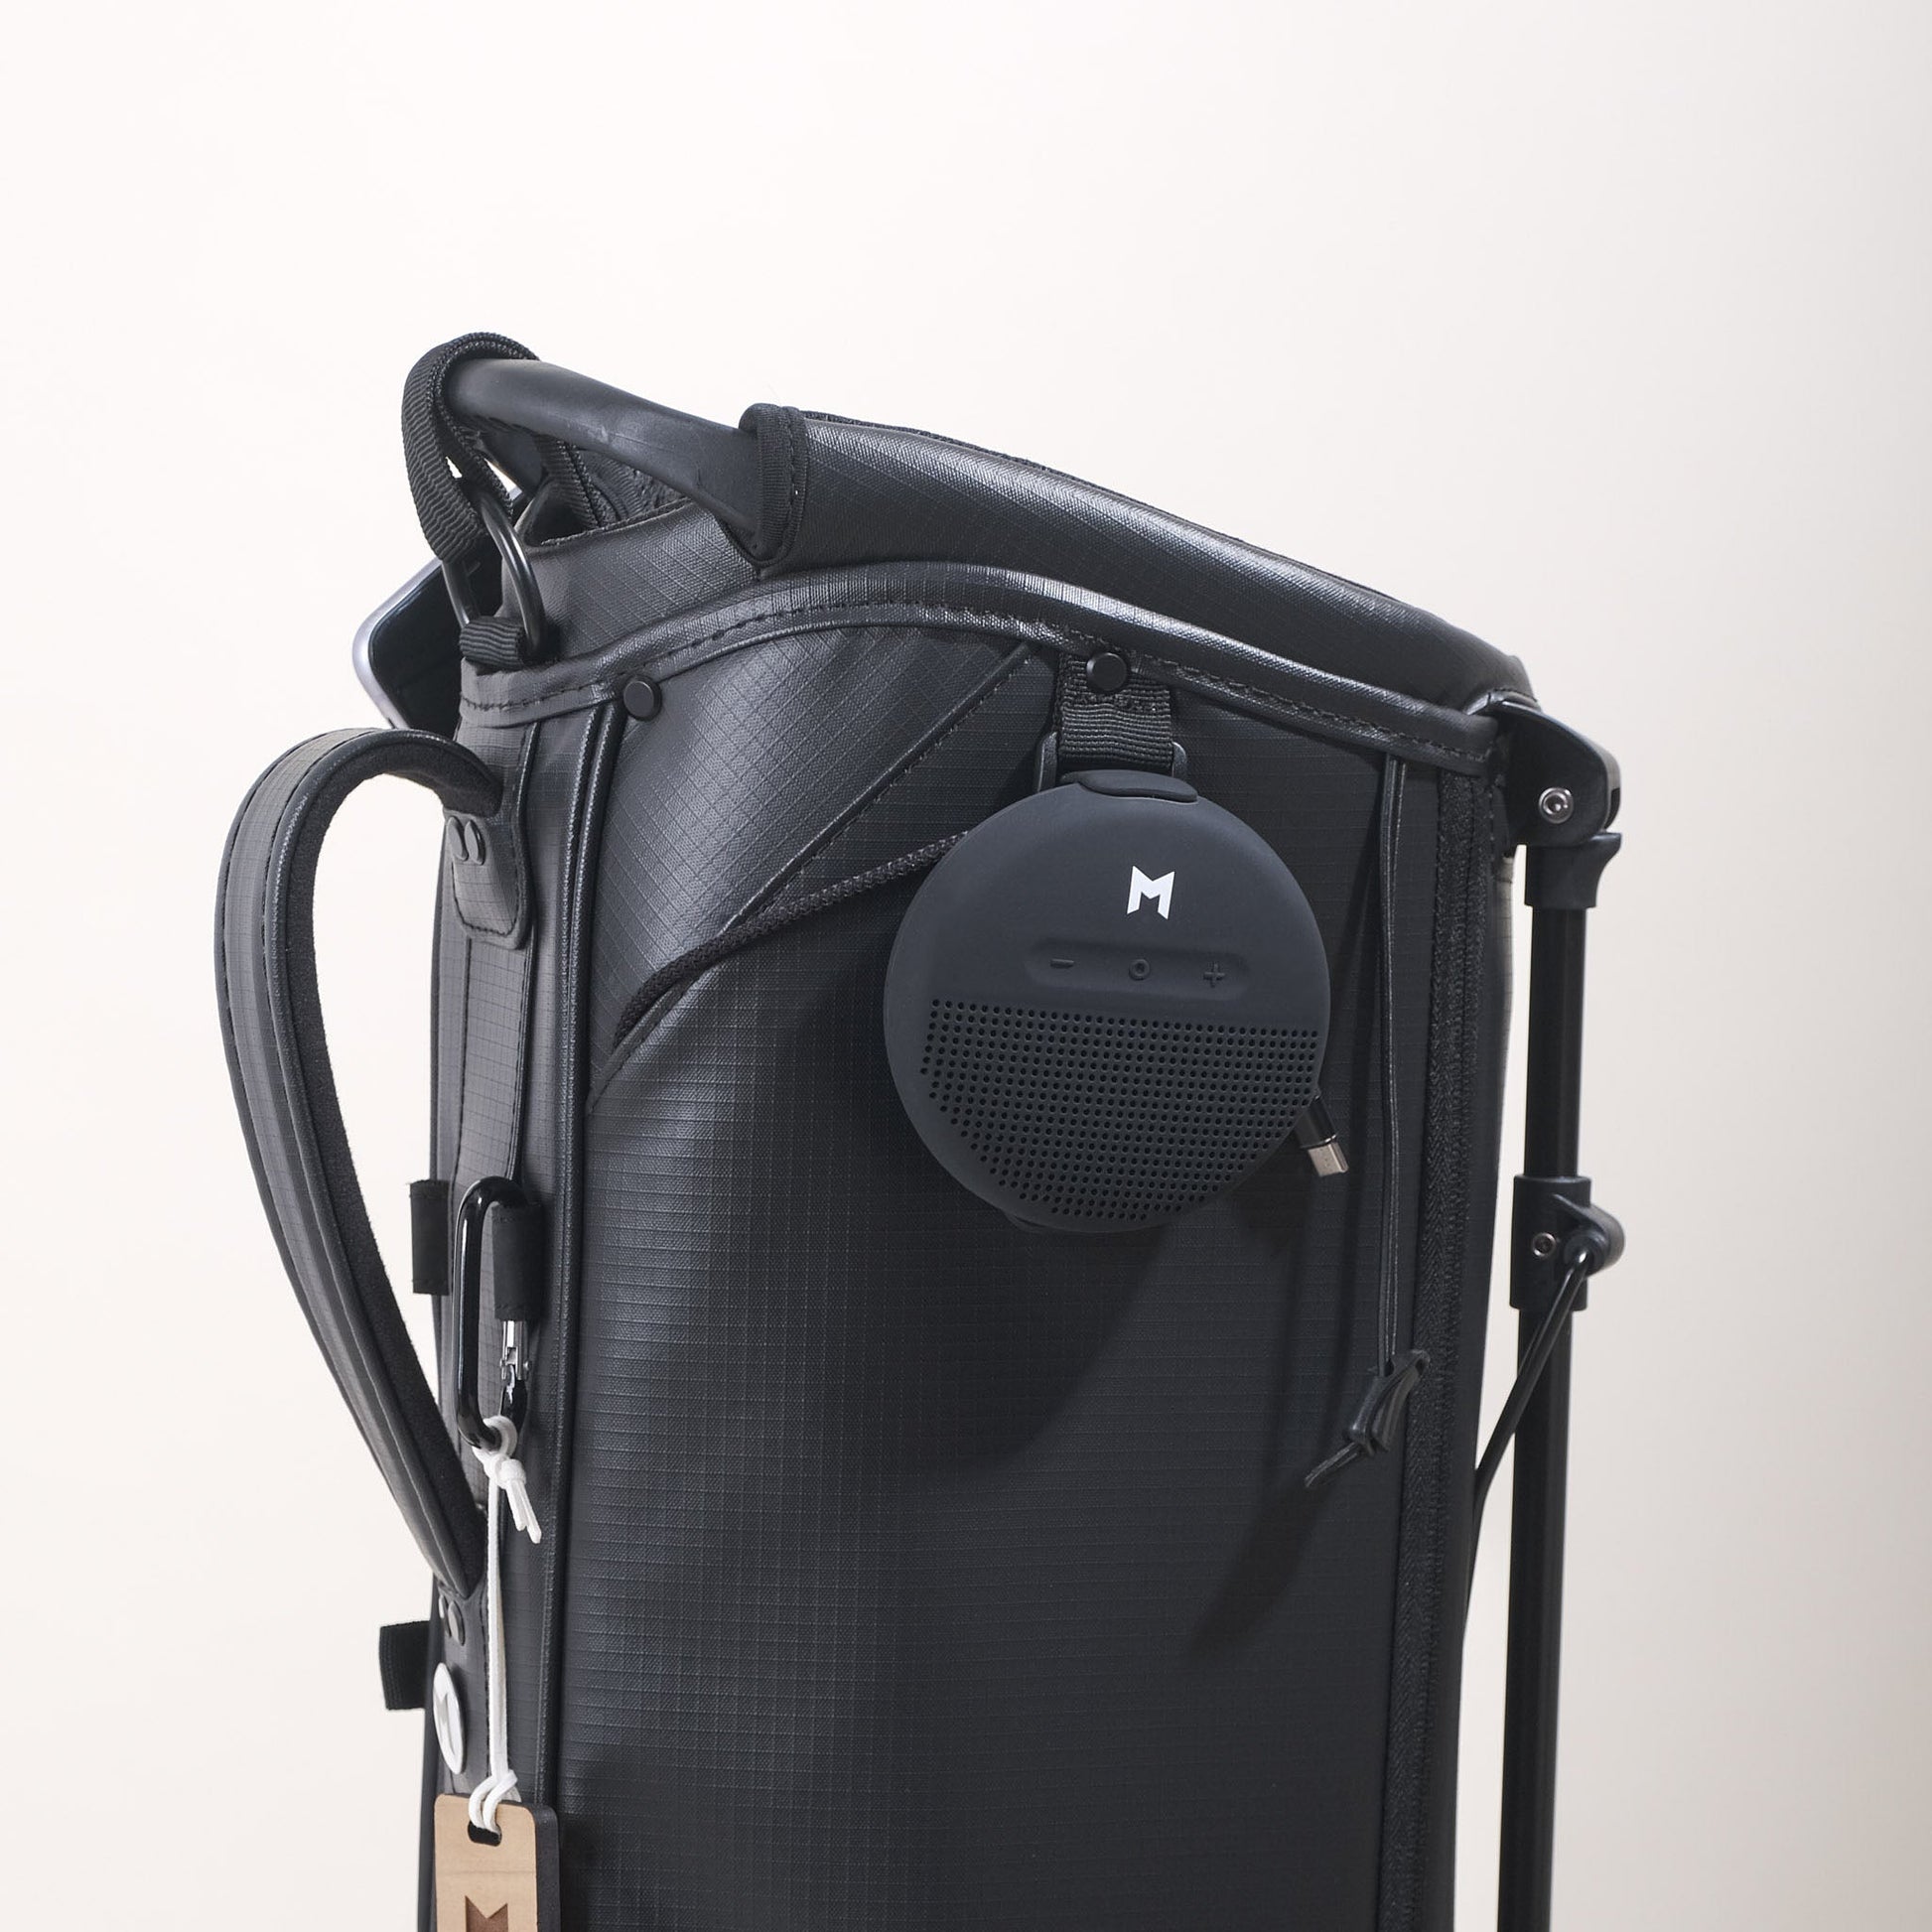 The MNML GOLF MR1 golf bag is available for purchase via the Trade It Forward program.